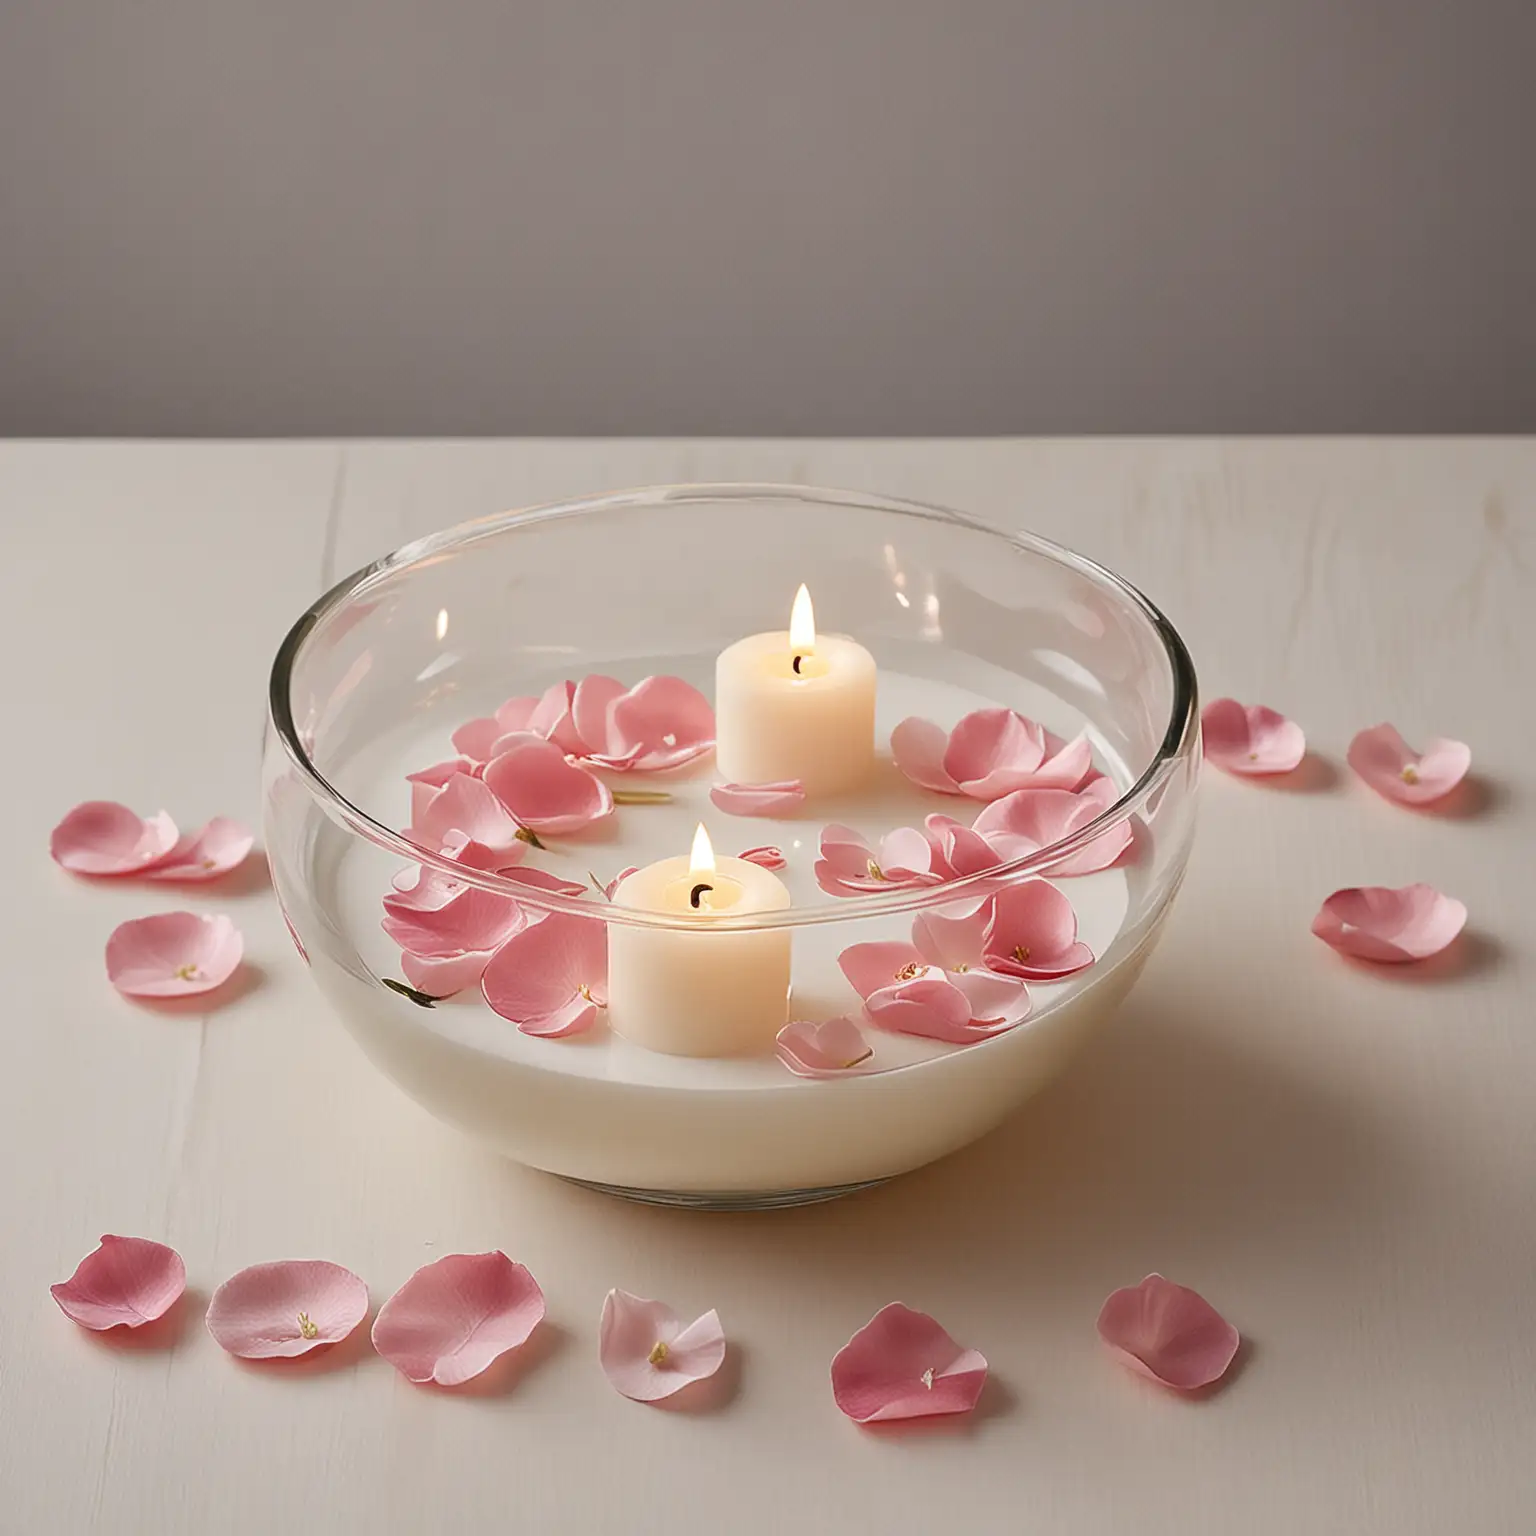 Minimalist-Floating-Candle-and-Petal-Centerpiece-for-Romantic-Weddings